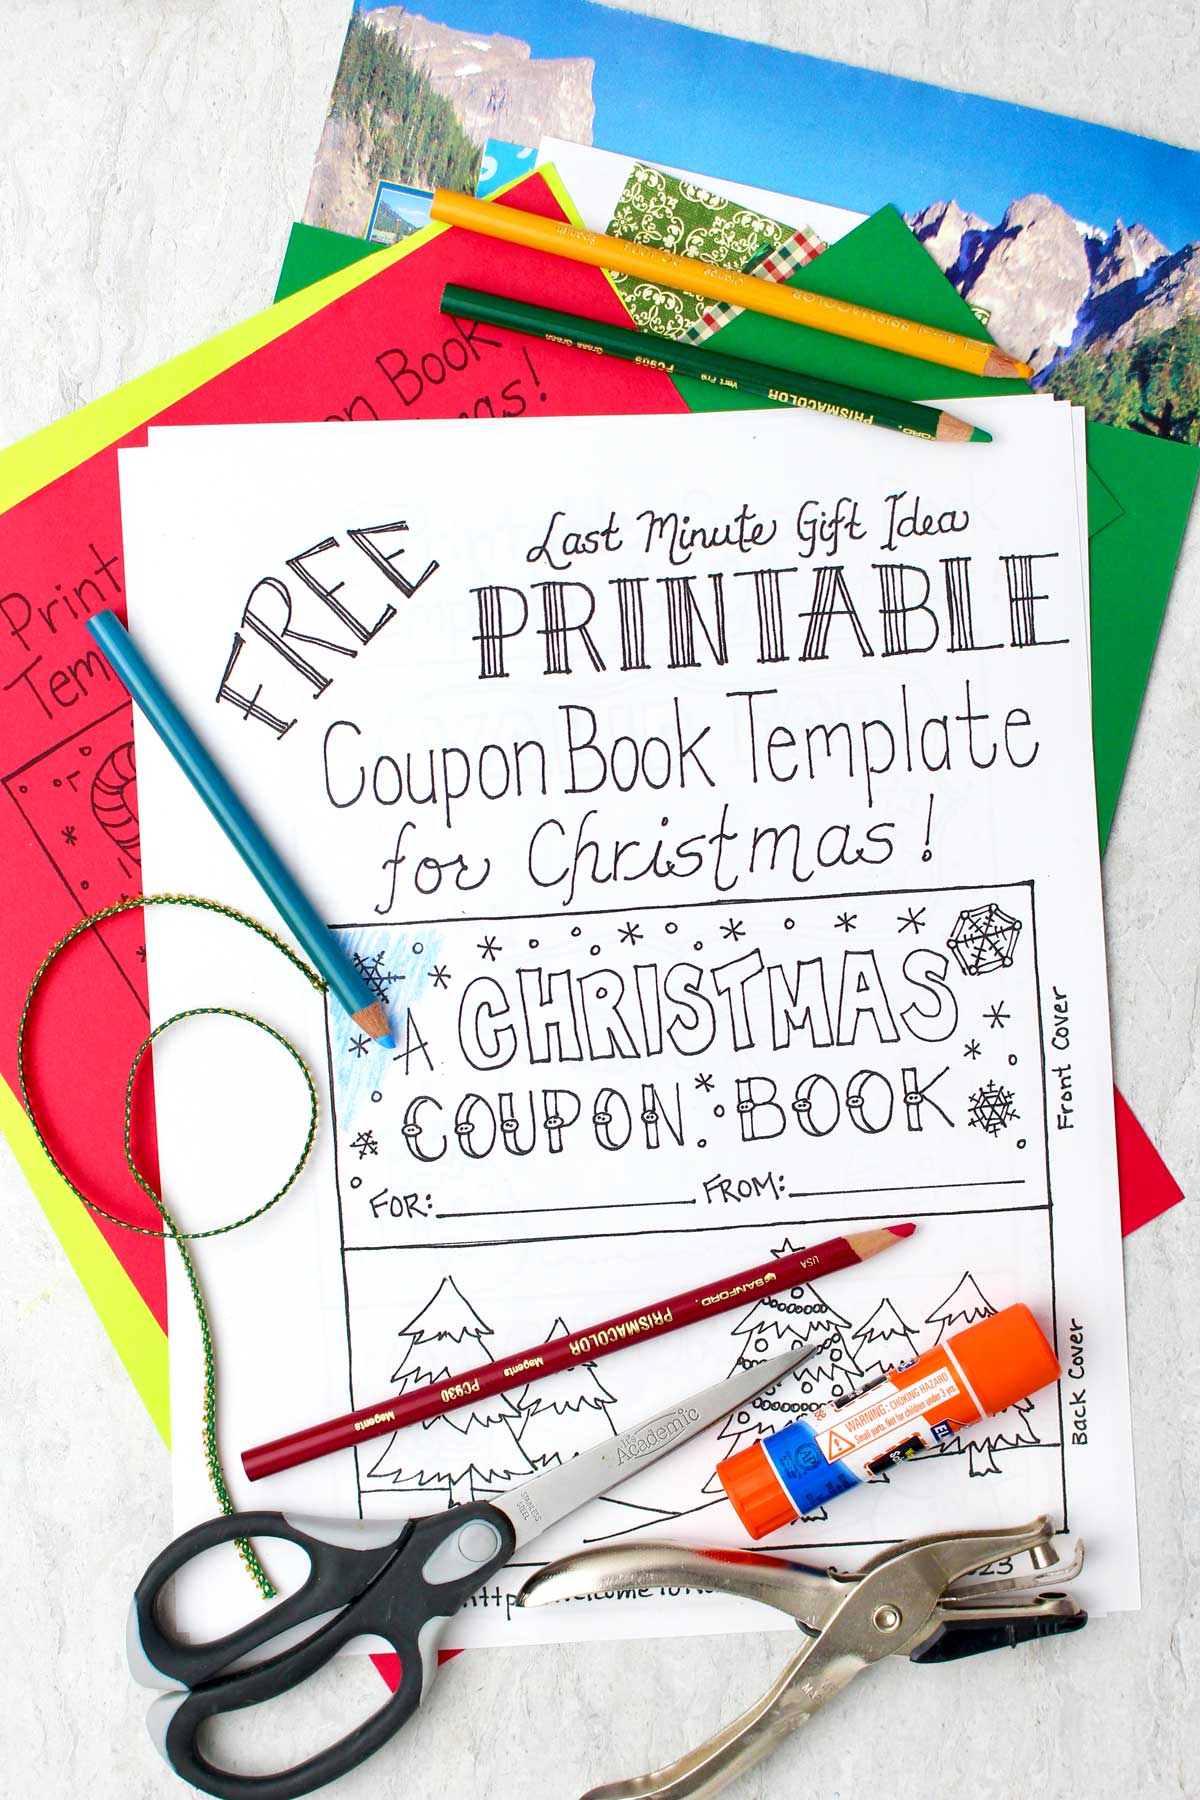 A free printable coupon book template sitting on a stack of colorful papers, scissors, a hole punch, glue, and colored pencils nearby.